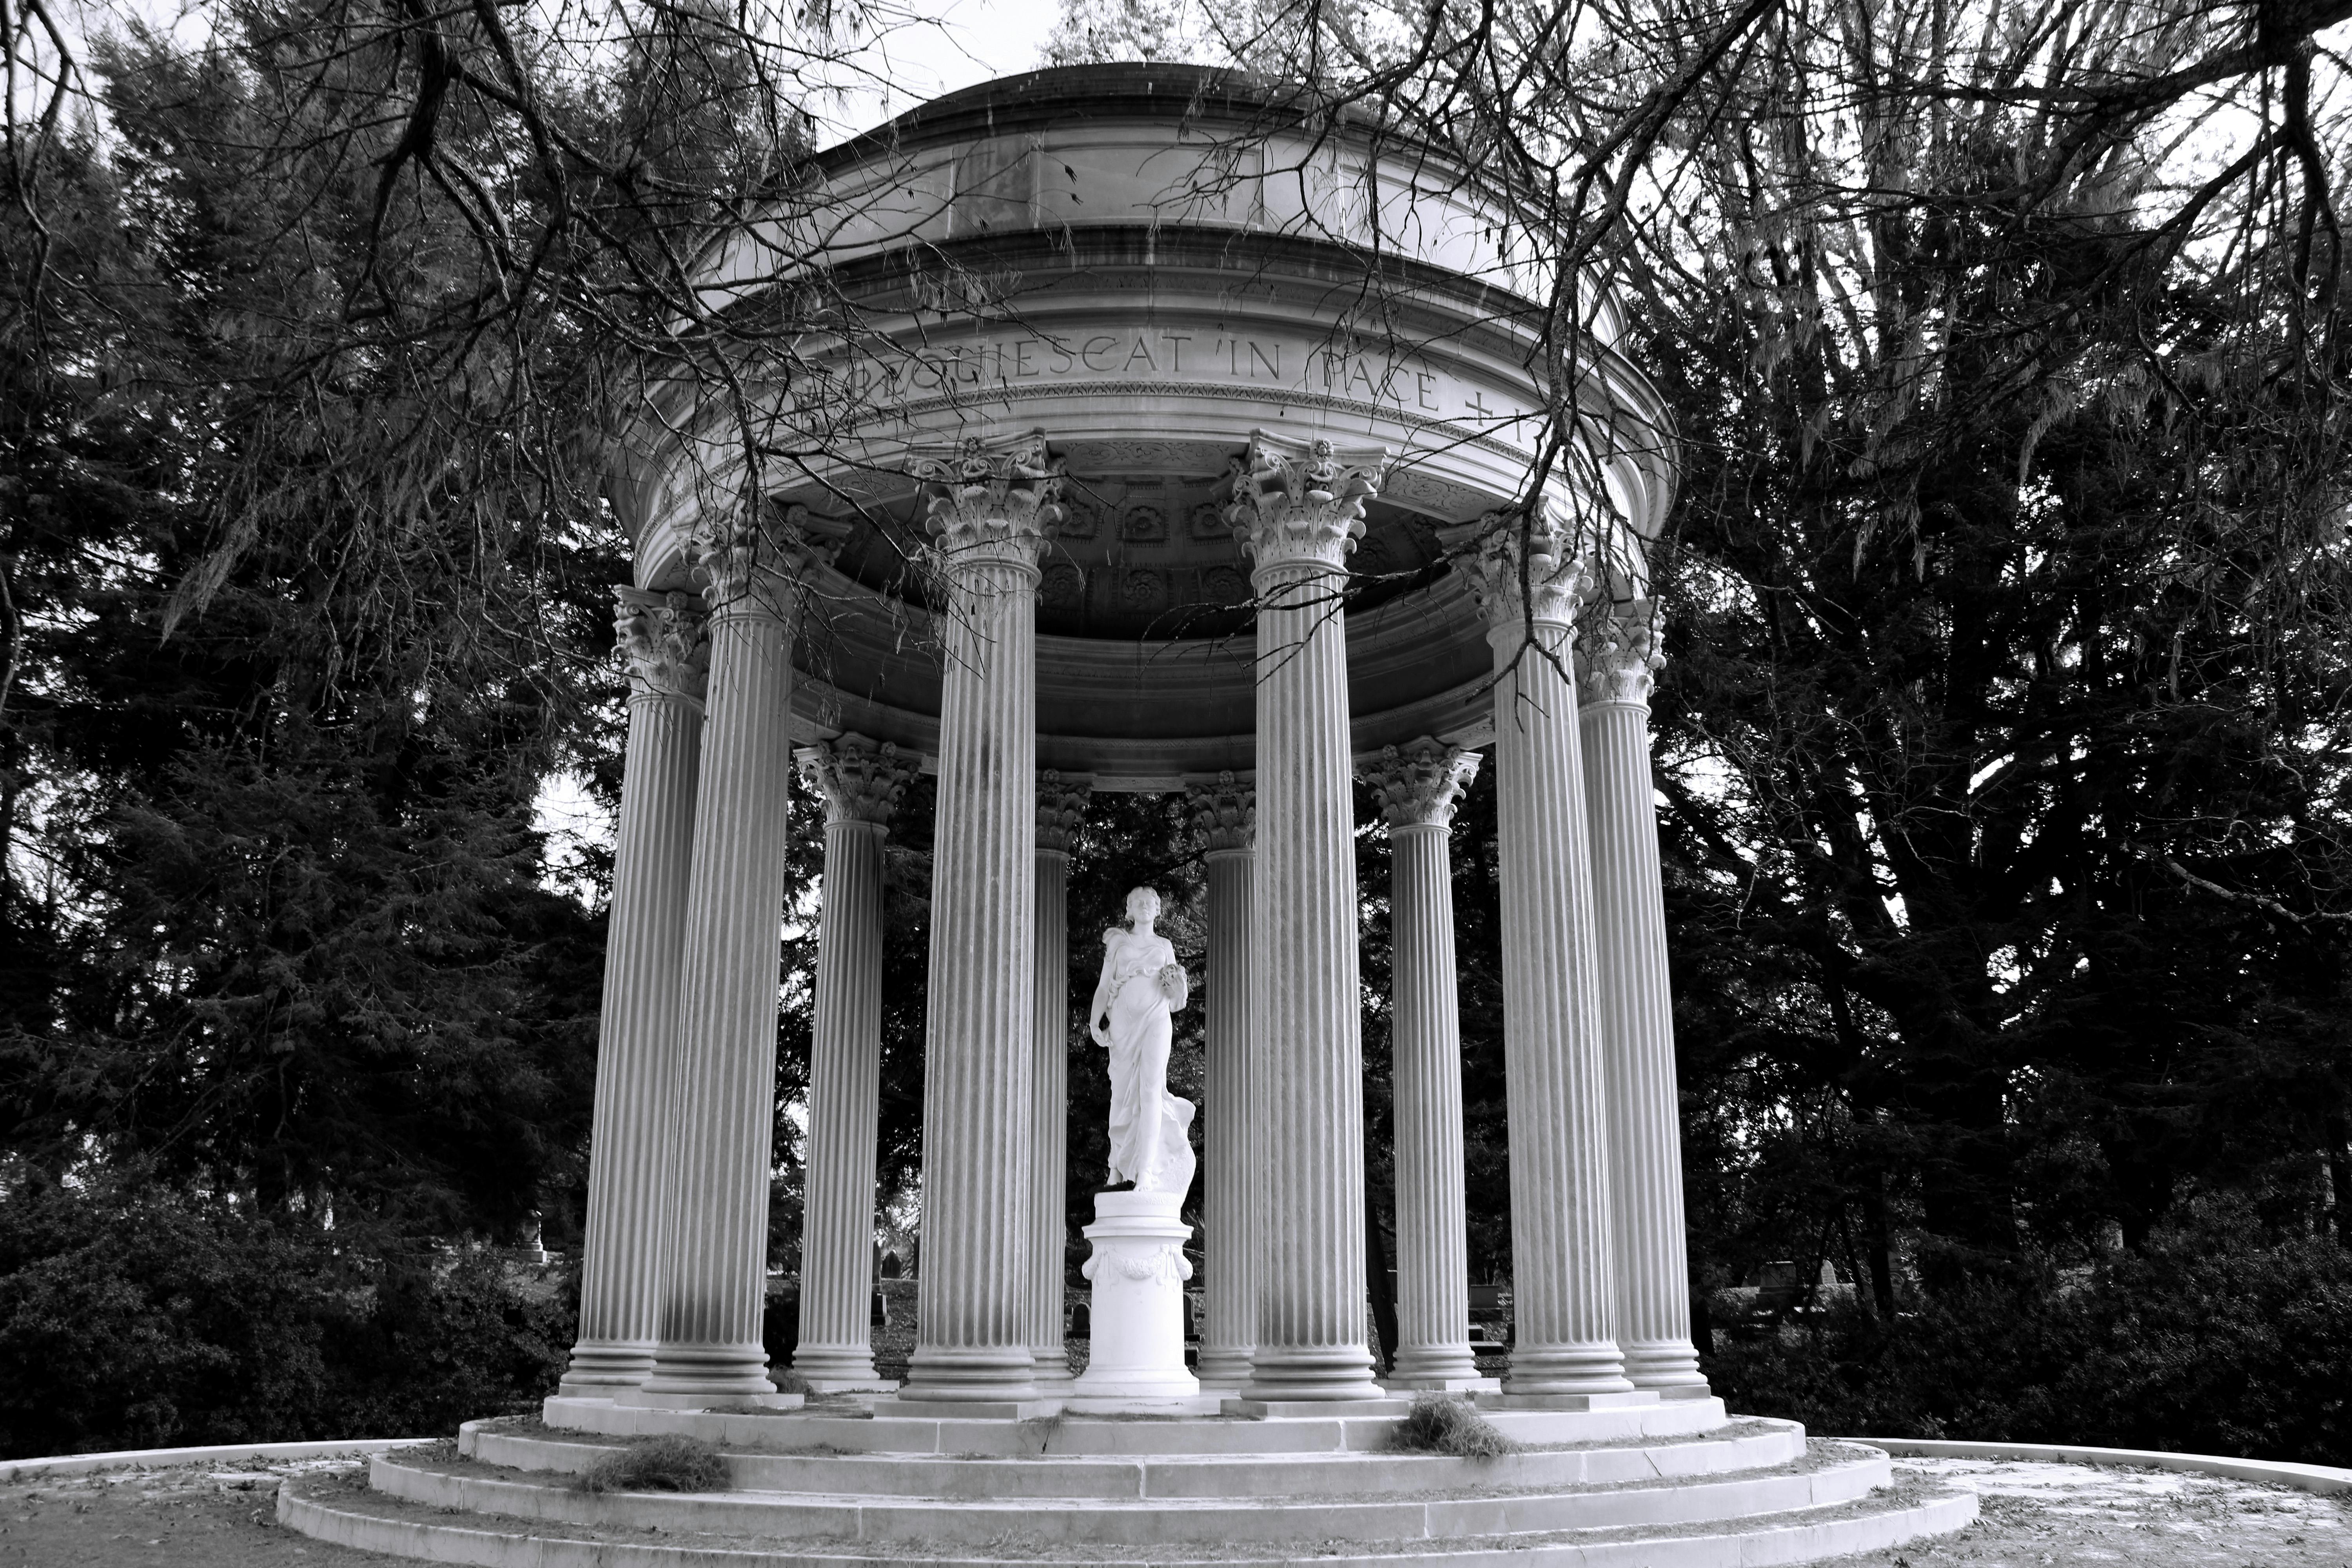 temple of love memorial in cave hill cemetery in louisville kentucky usa